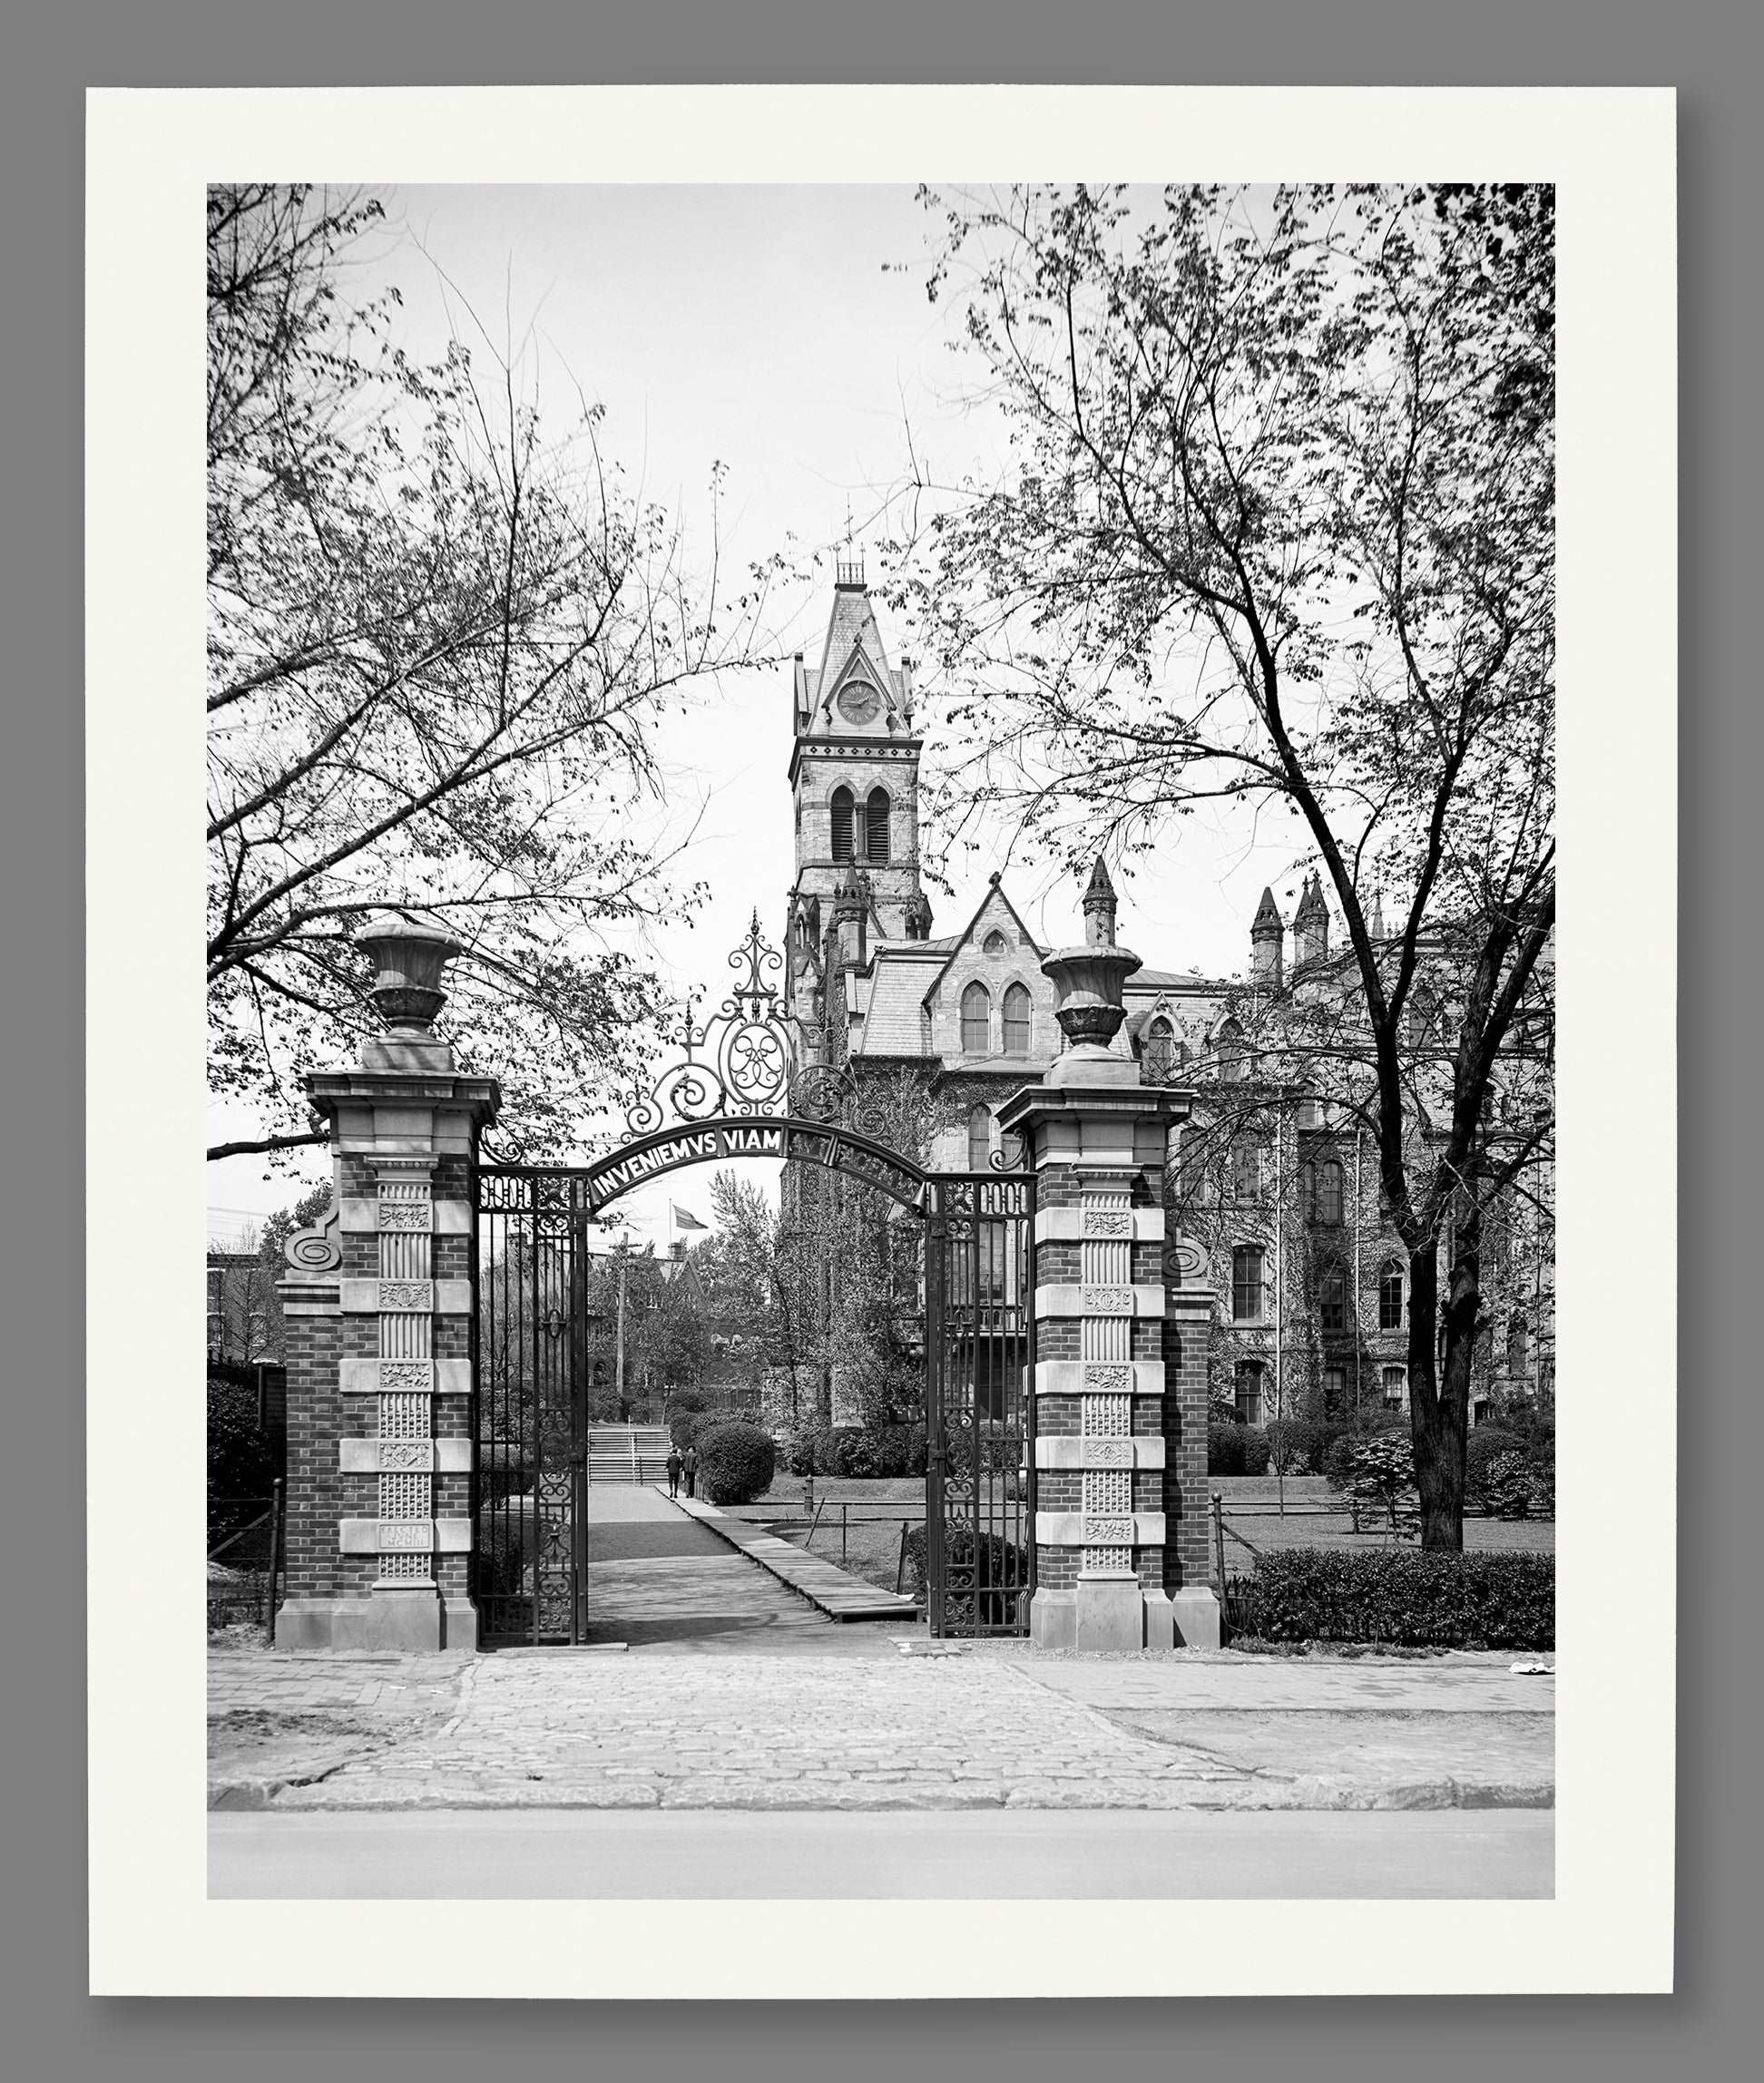 A paper print of vintage photograph of the University of Pennsylvania